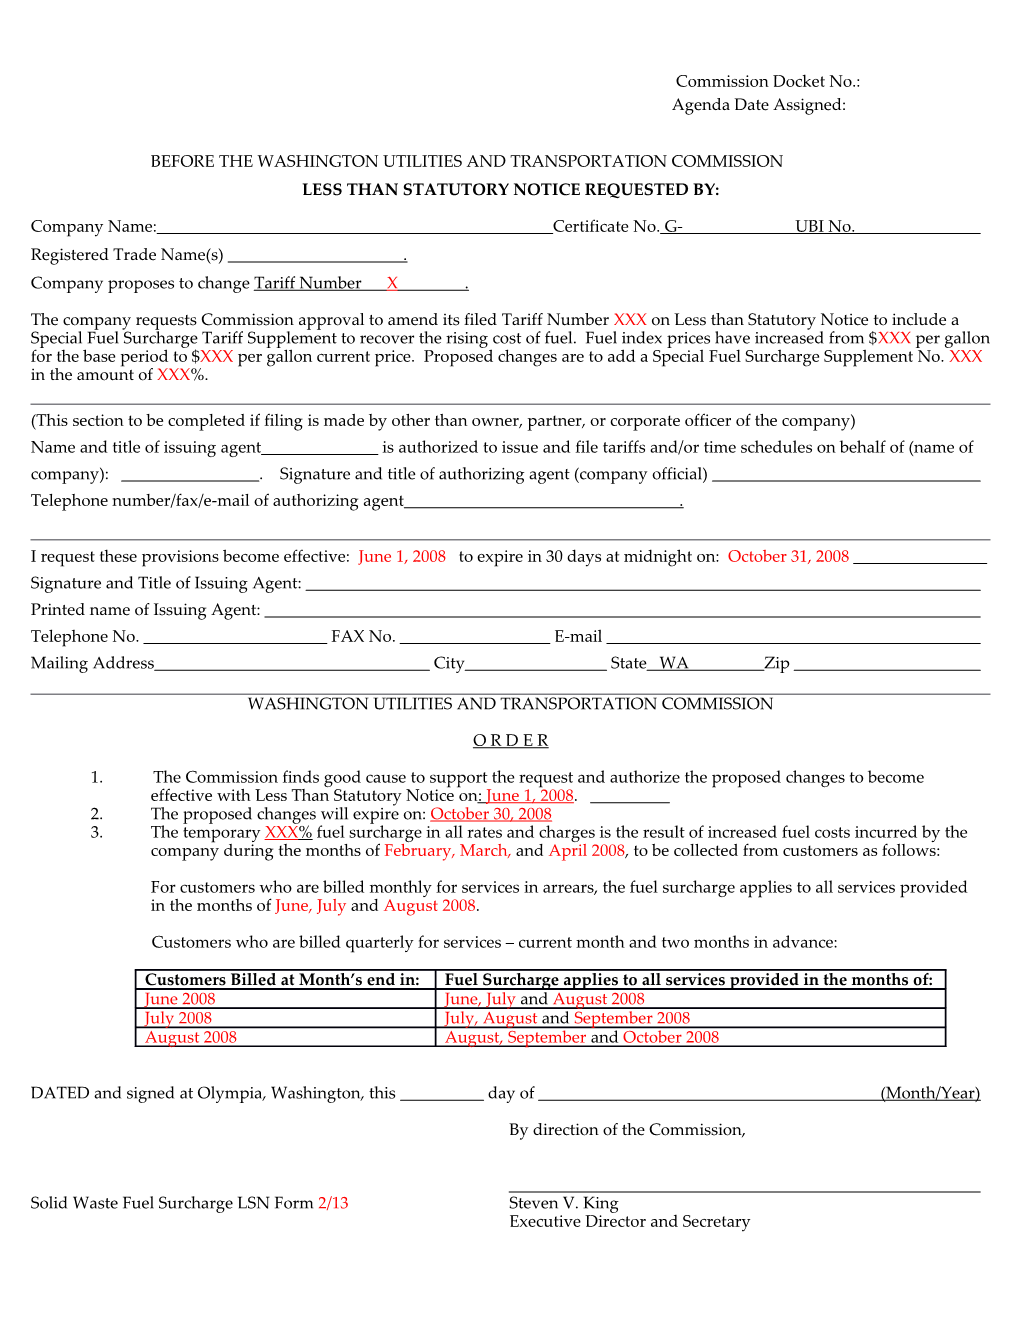 Fuel Surcharge LSN Form - 3Rd Billing Period